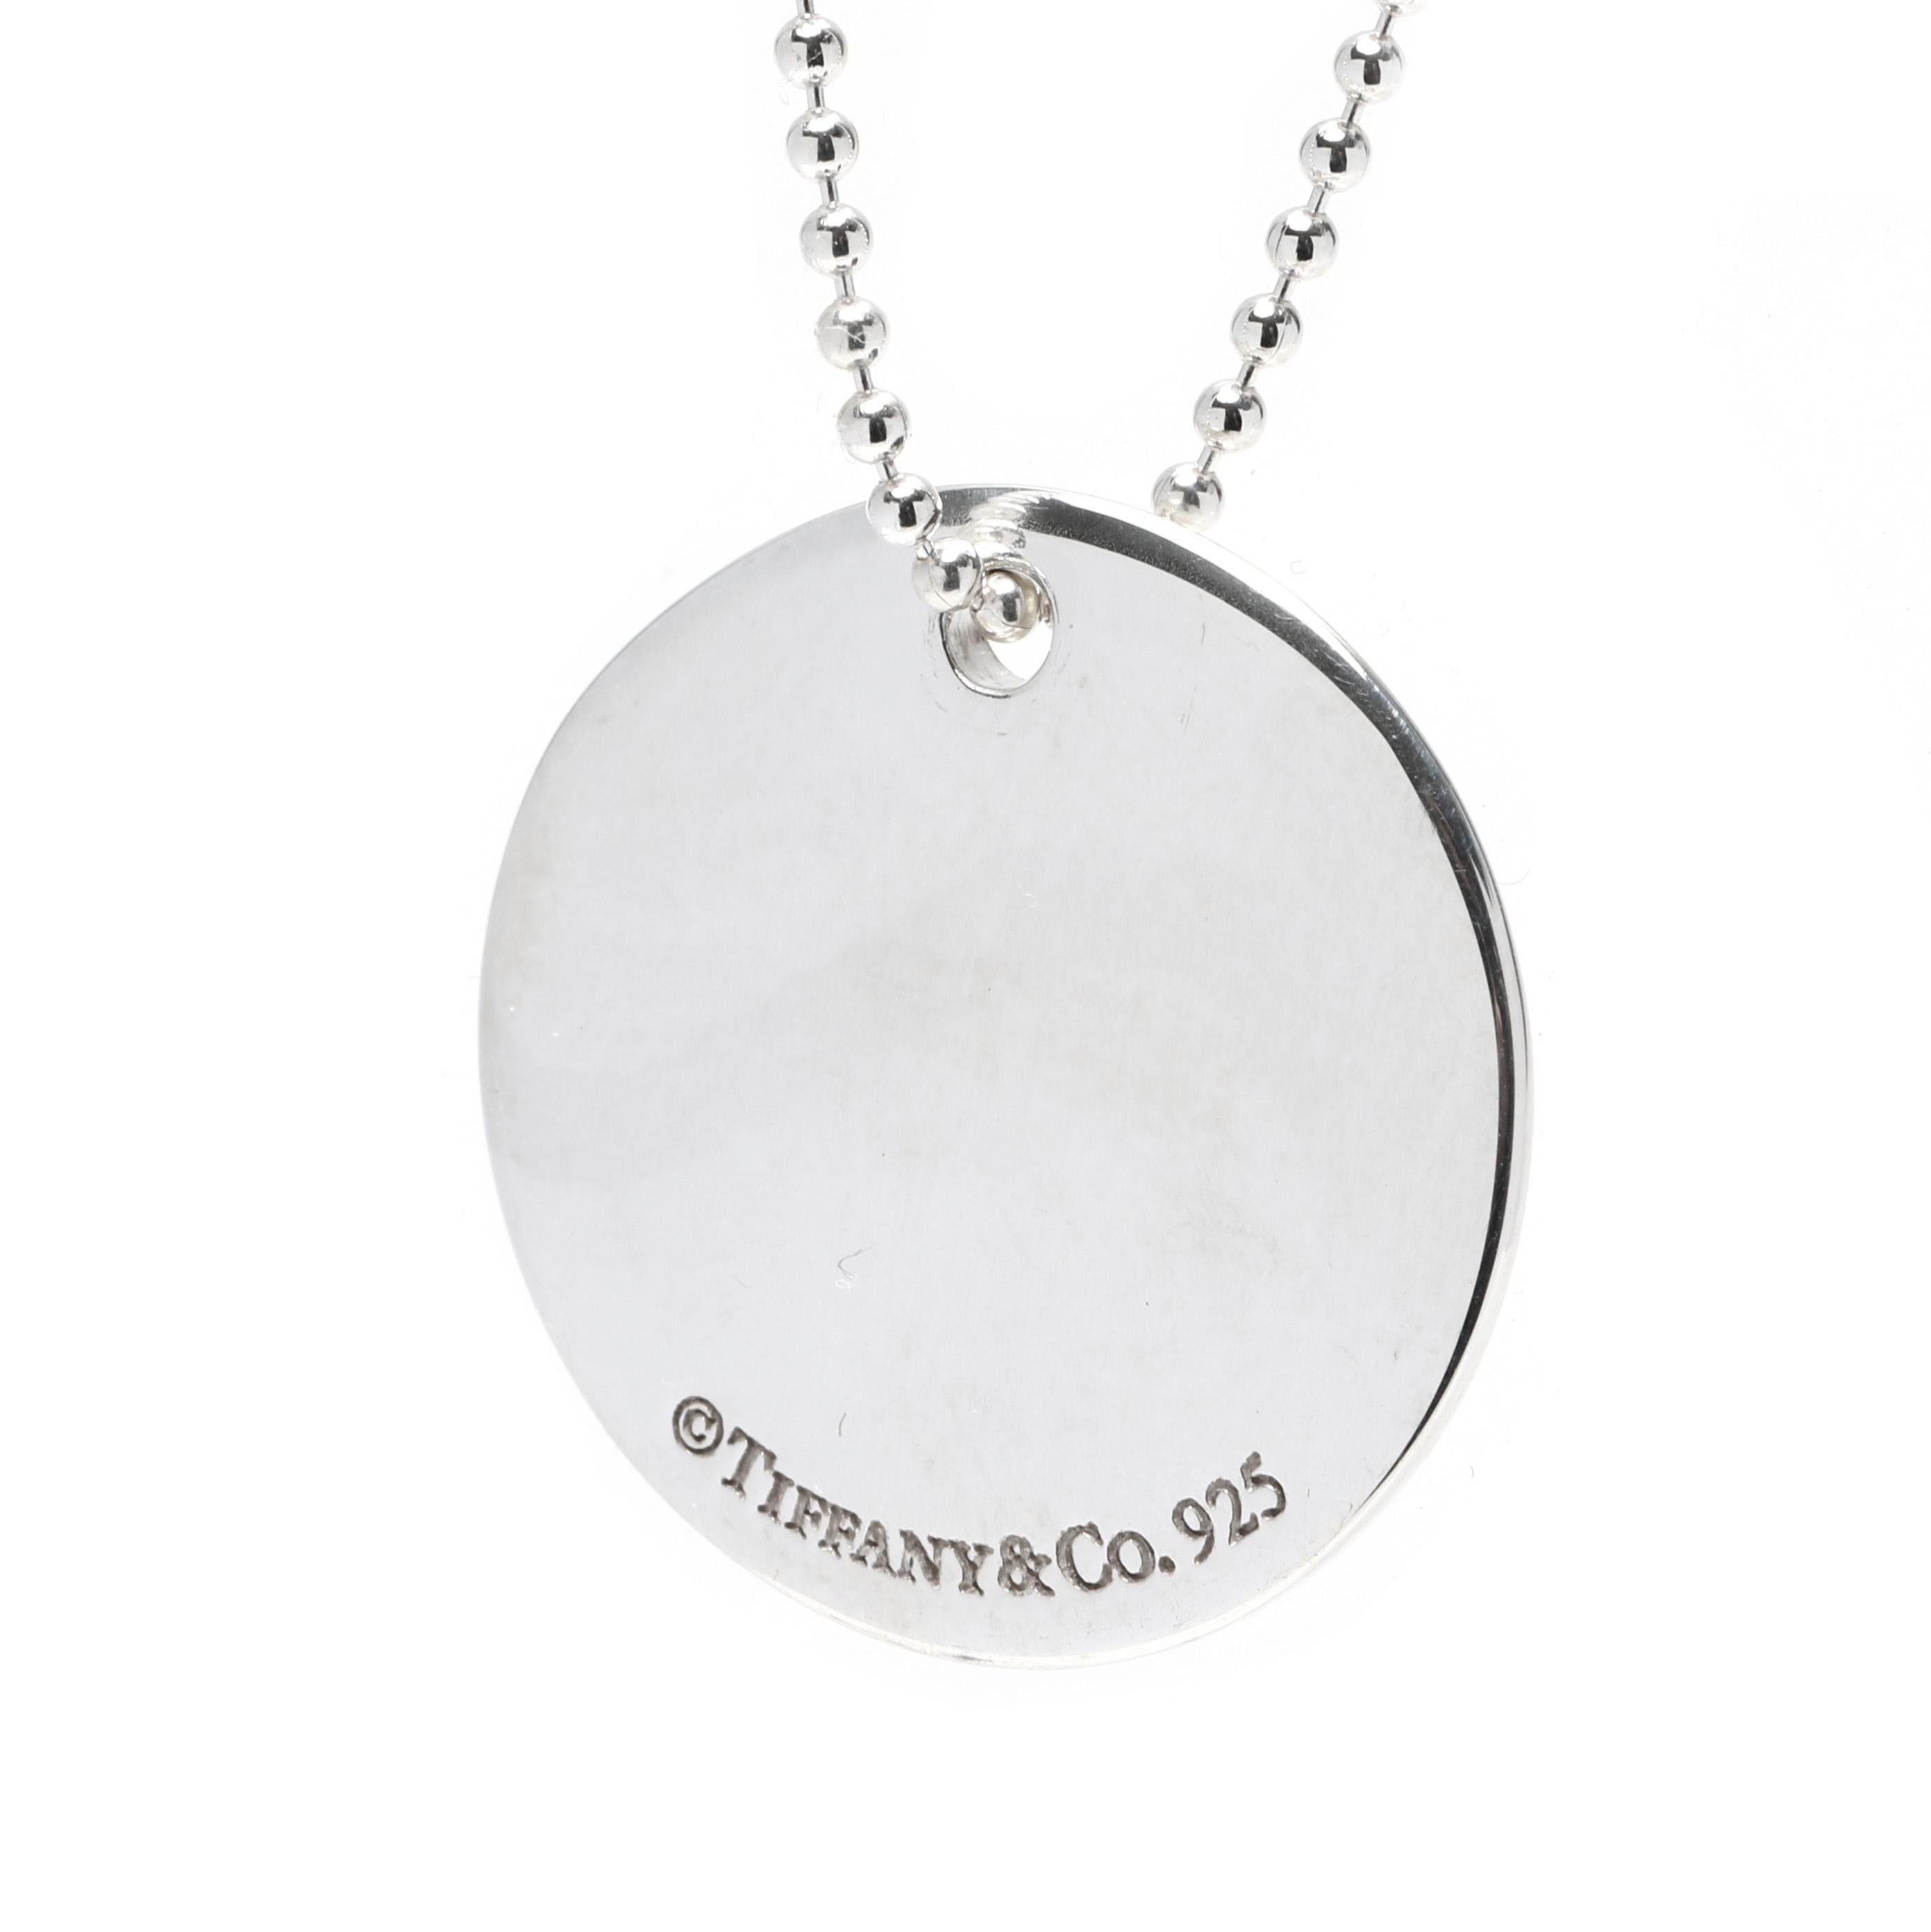 This classic Tiffany and Company script A initial necklace is the perfect way to add a personalized touch to any look. Crafted in sterling silver, this simple disc pendant features a script A initial and hangs from an 18-inch chain. This timeless